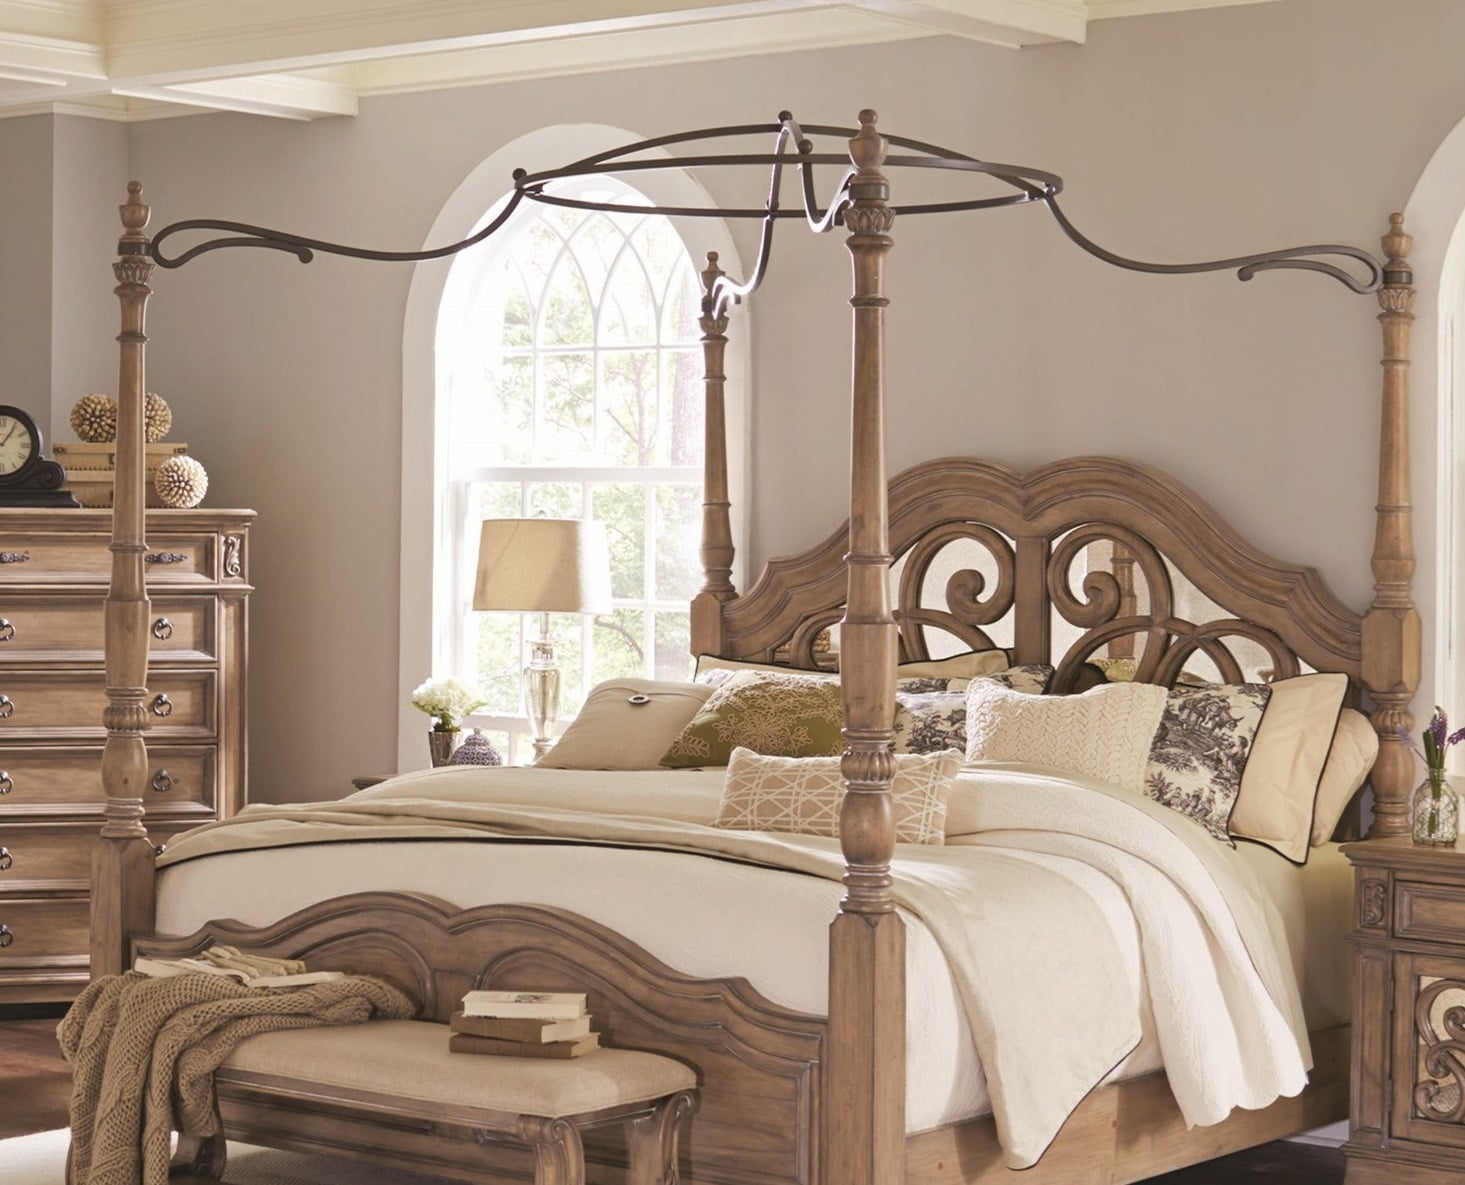 Lavina Shaker Style Canopy Four Piece Bedroom Set from DutchCrafters